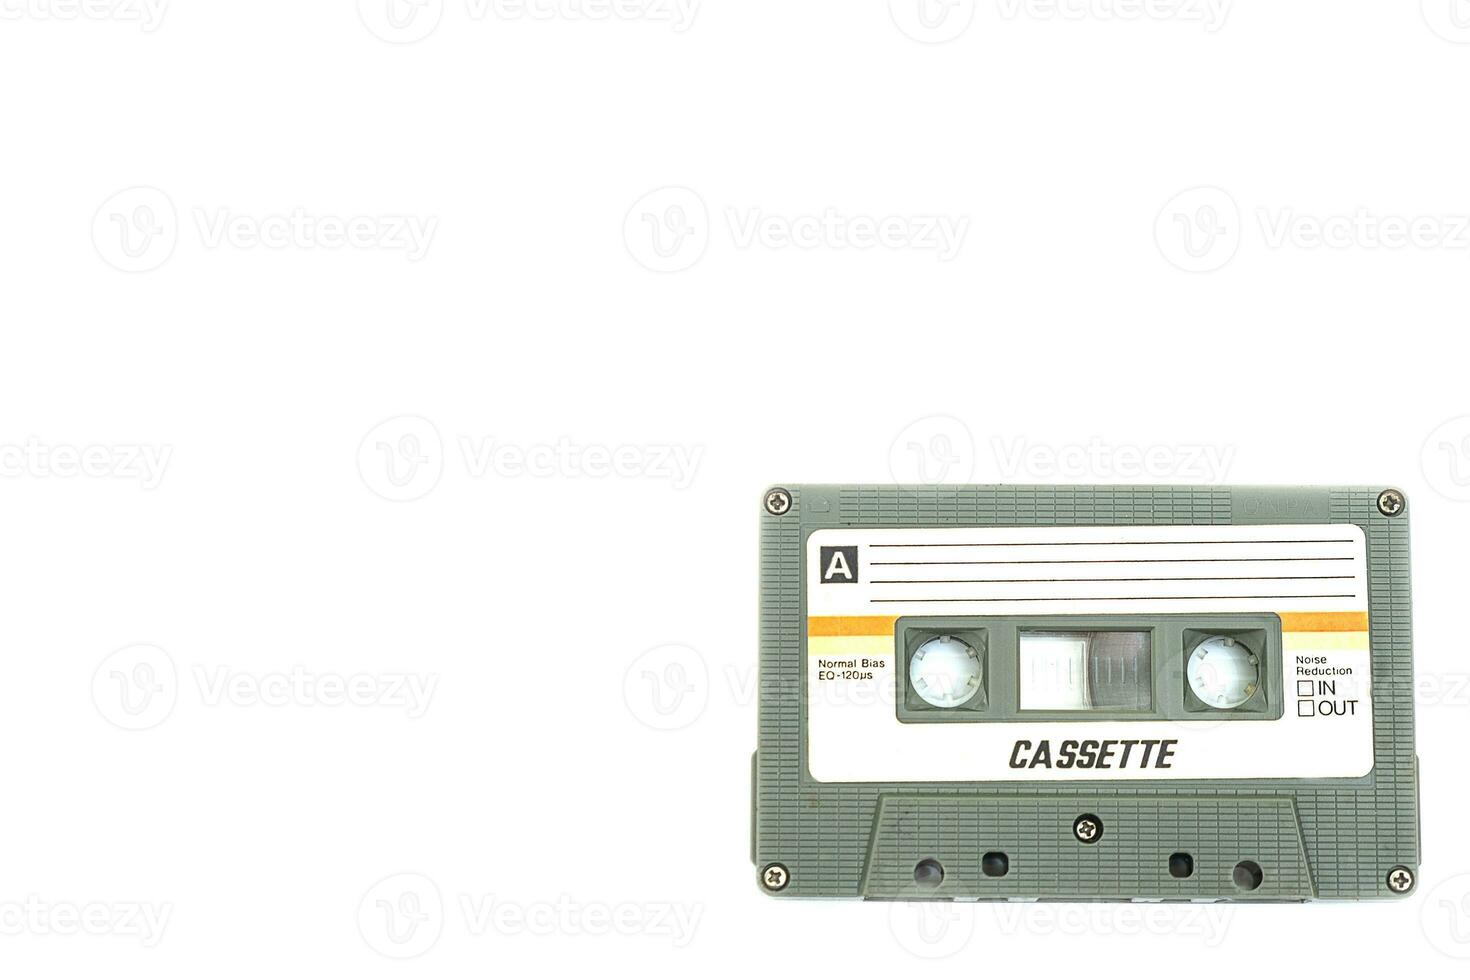 Vintage compact cassette tape on white background photo